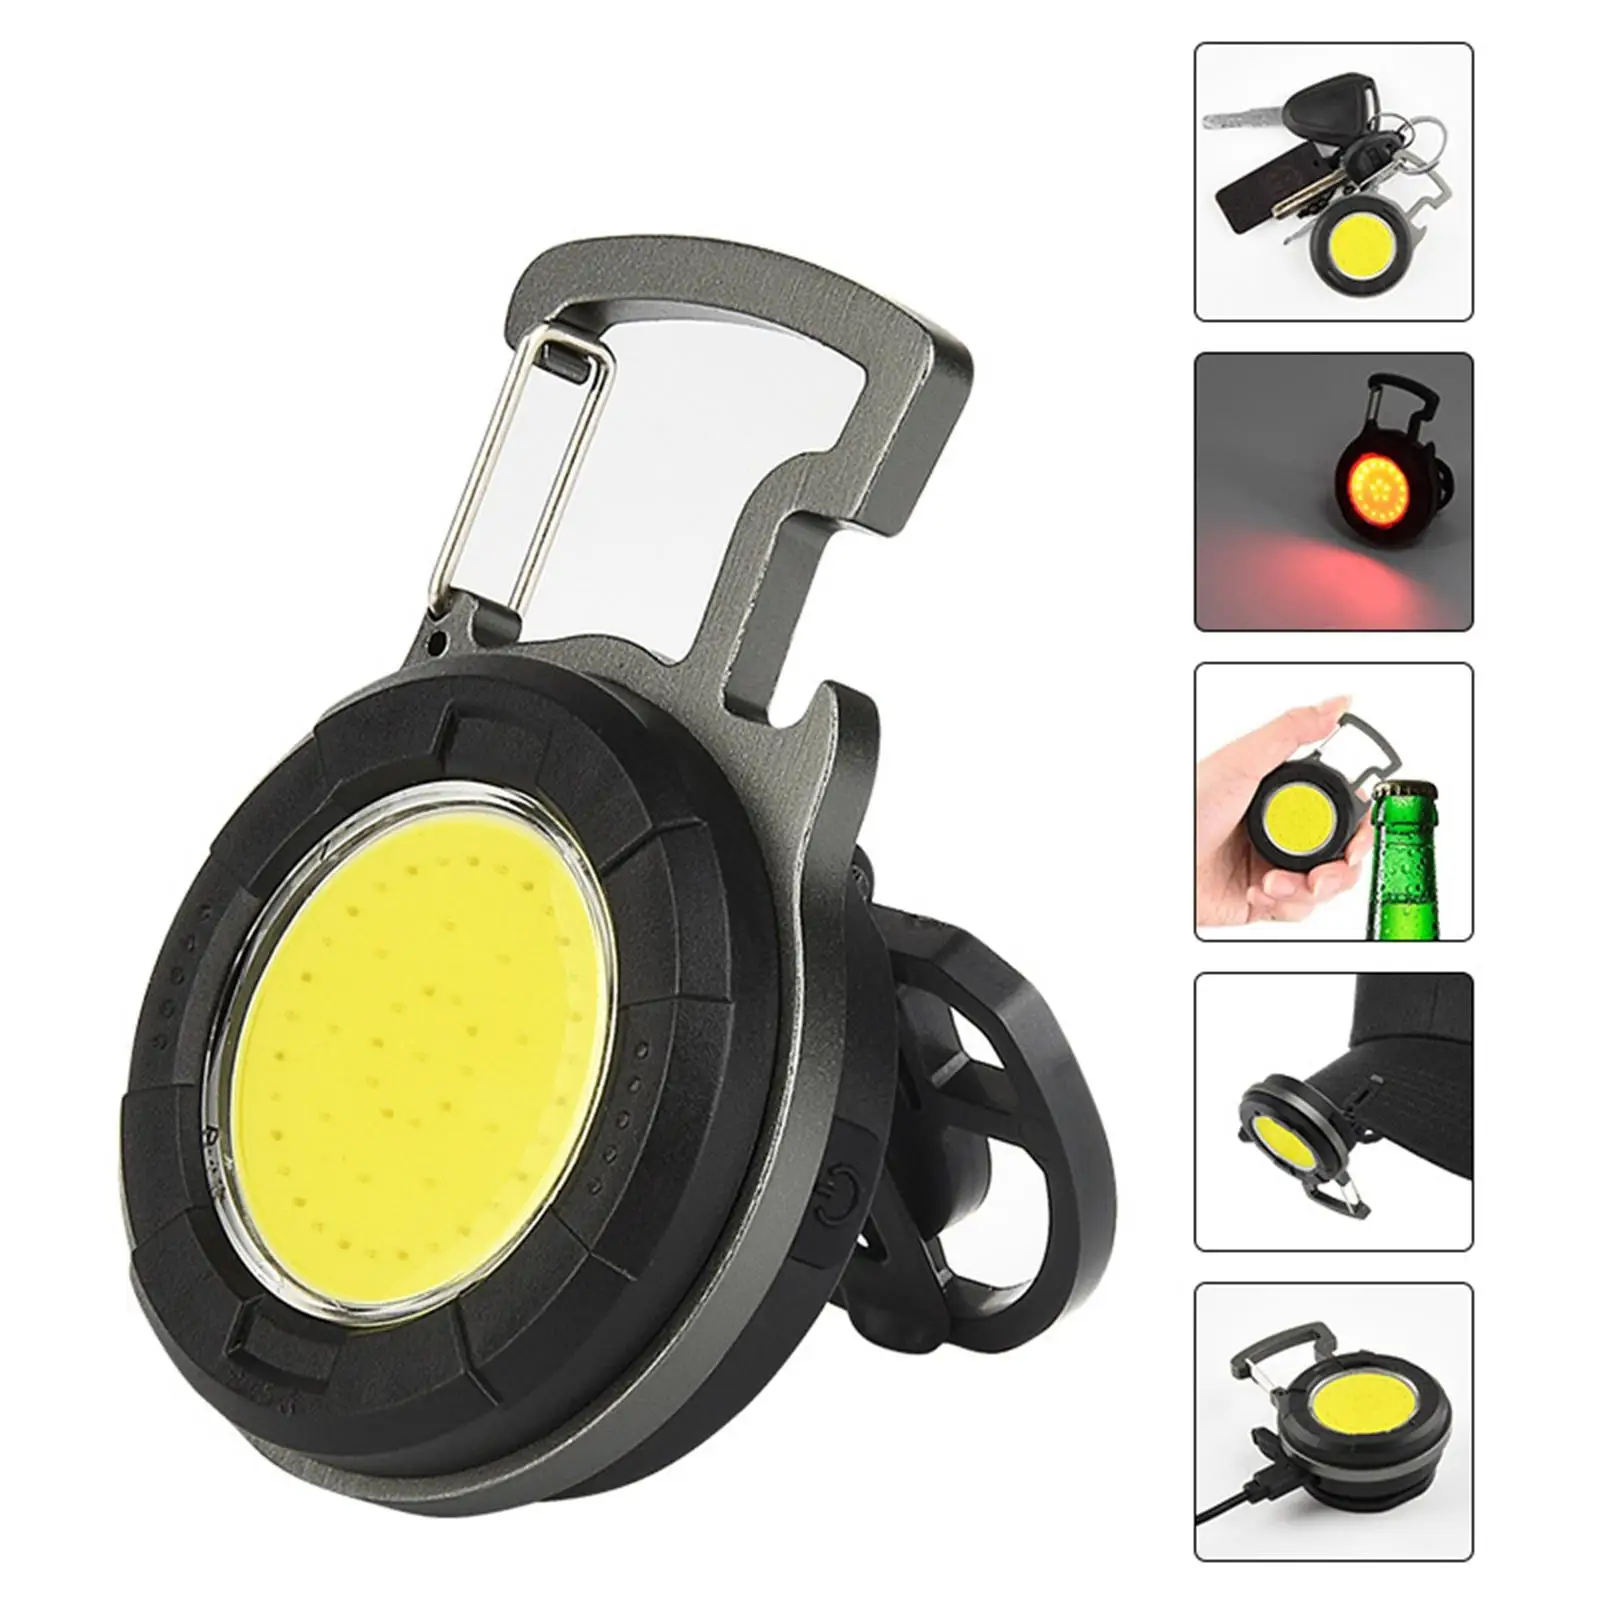 Mini COB flashlights LED Keychain Torch Bright Rechargeable Pocket Light for Emergency Outdoor Activities Night Running Fishing